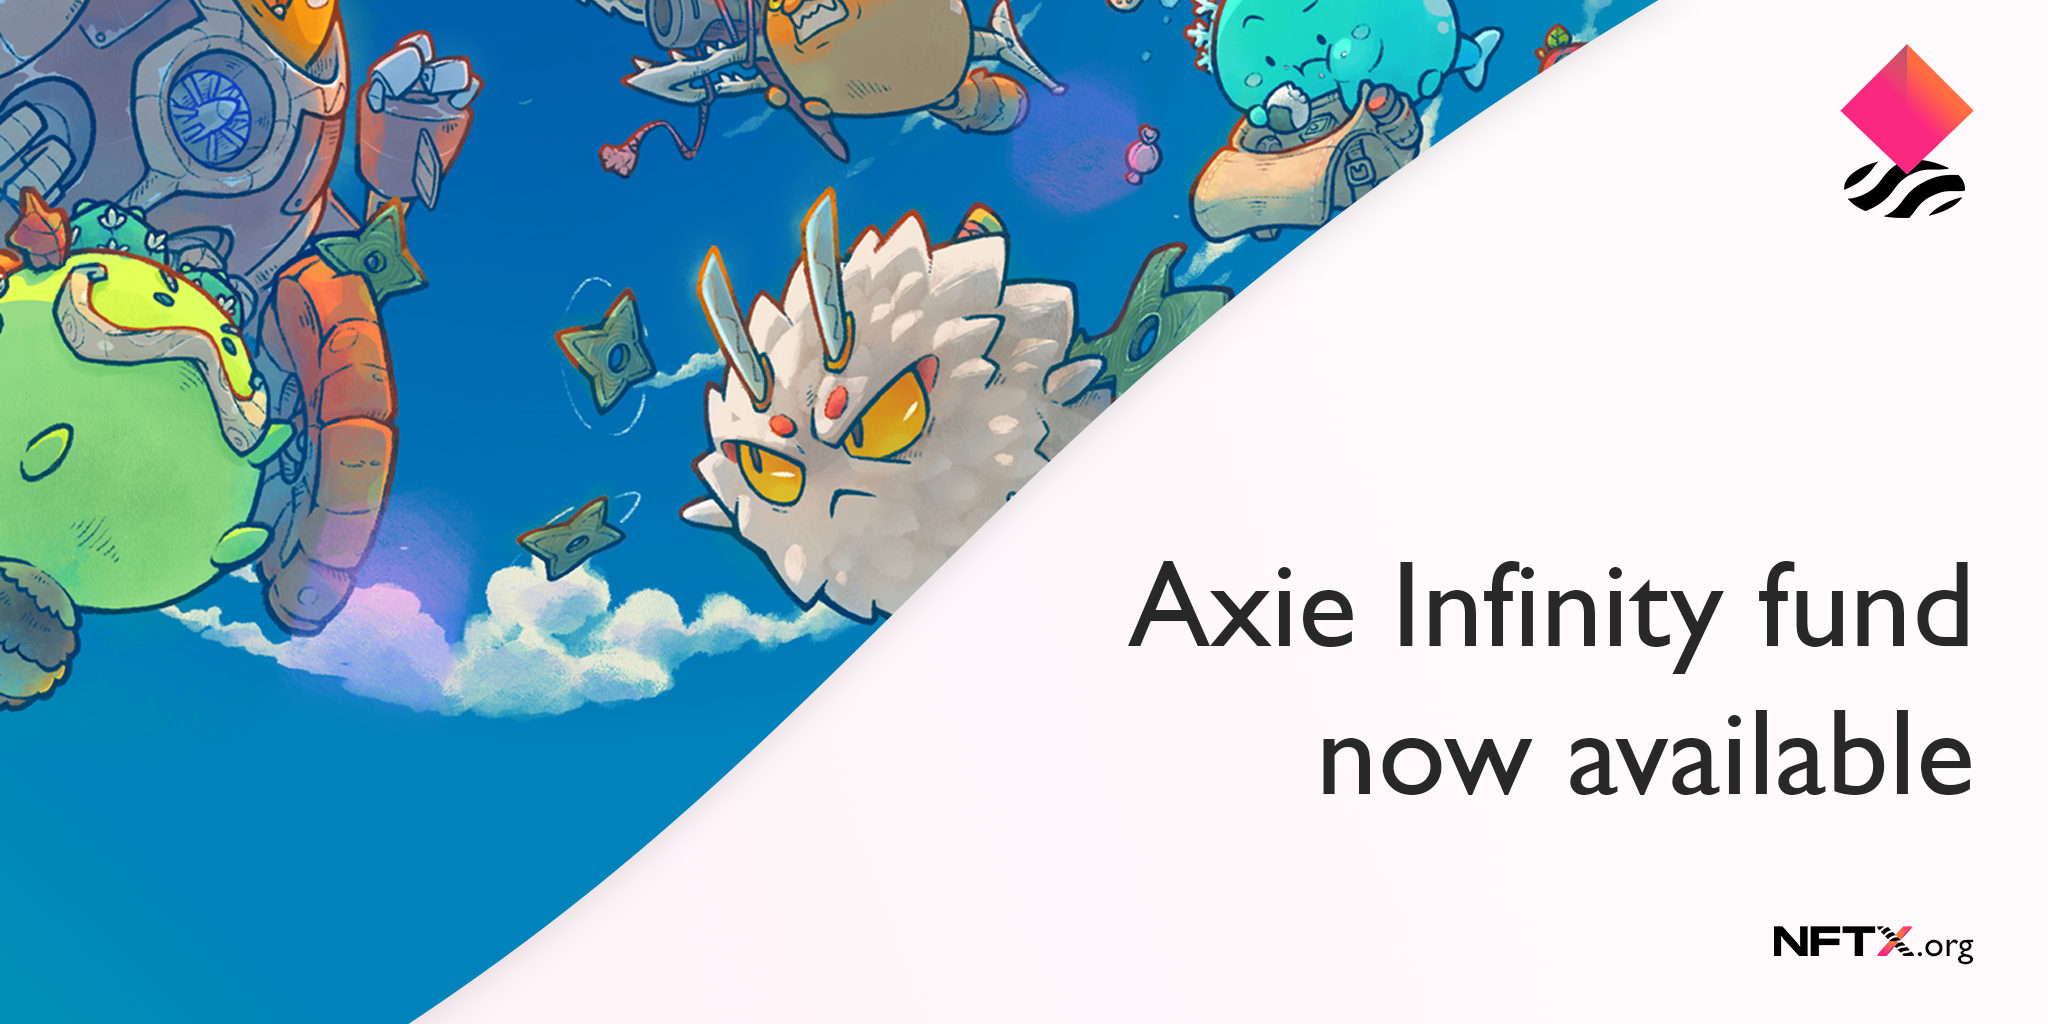 Axie Infinity Index fund is now available